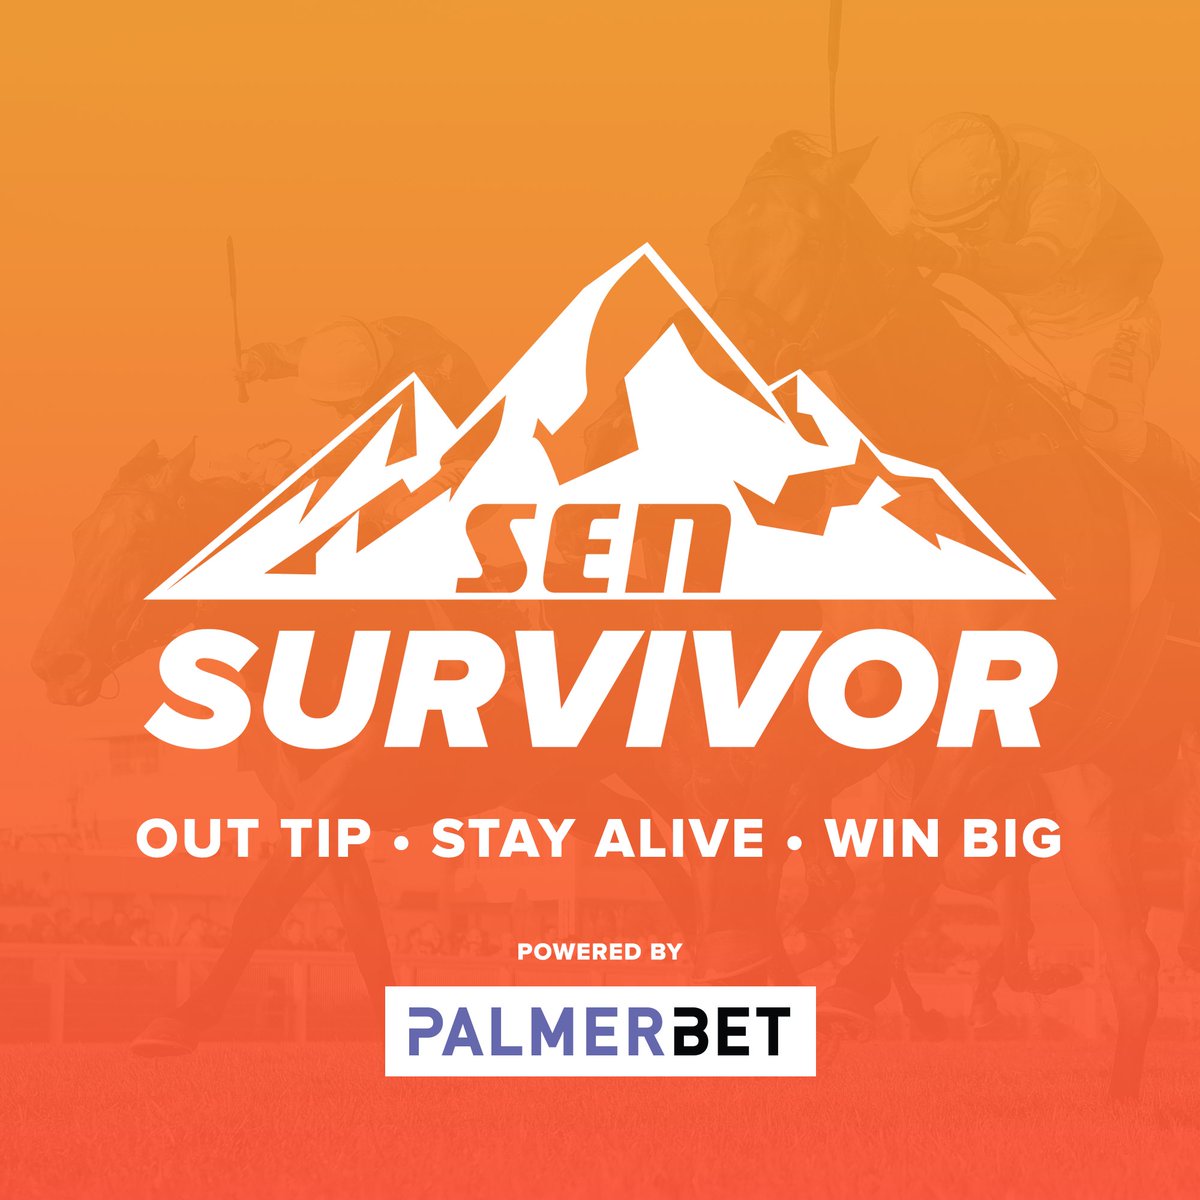 LAST CALL to get your tips in for RANDWICK for your chance to win $500! If your picks place, you survive. Get one wrong and you’re out. Last punter standing wins. ENTER: sen.lu/Survivor Powered by @PalmerbetAU